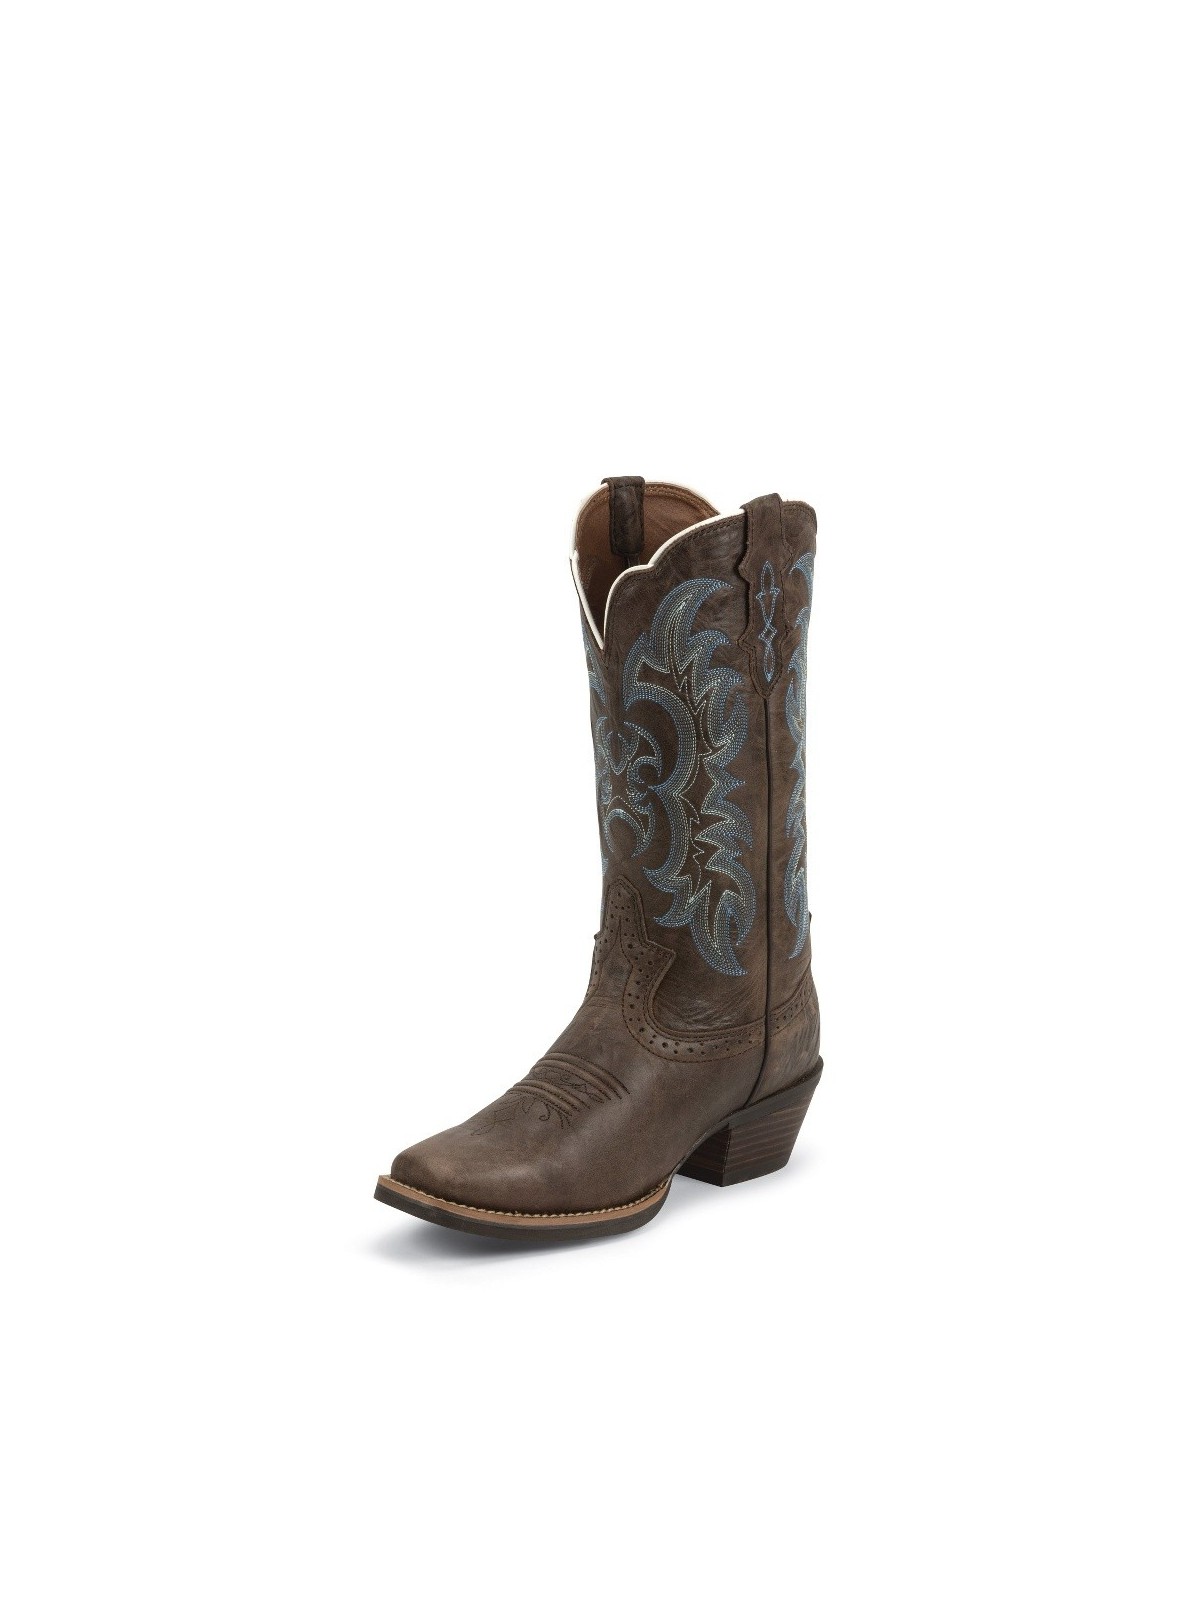 SVL7316 Justin Boots Damen Western Boots brown/turquoise